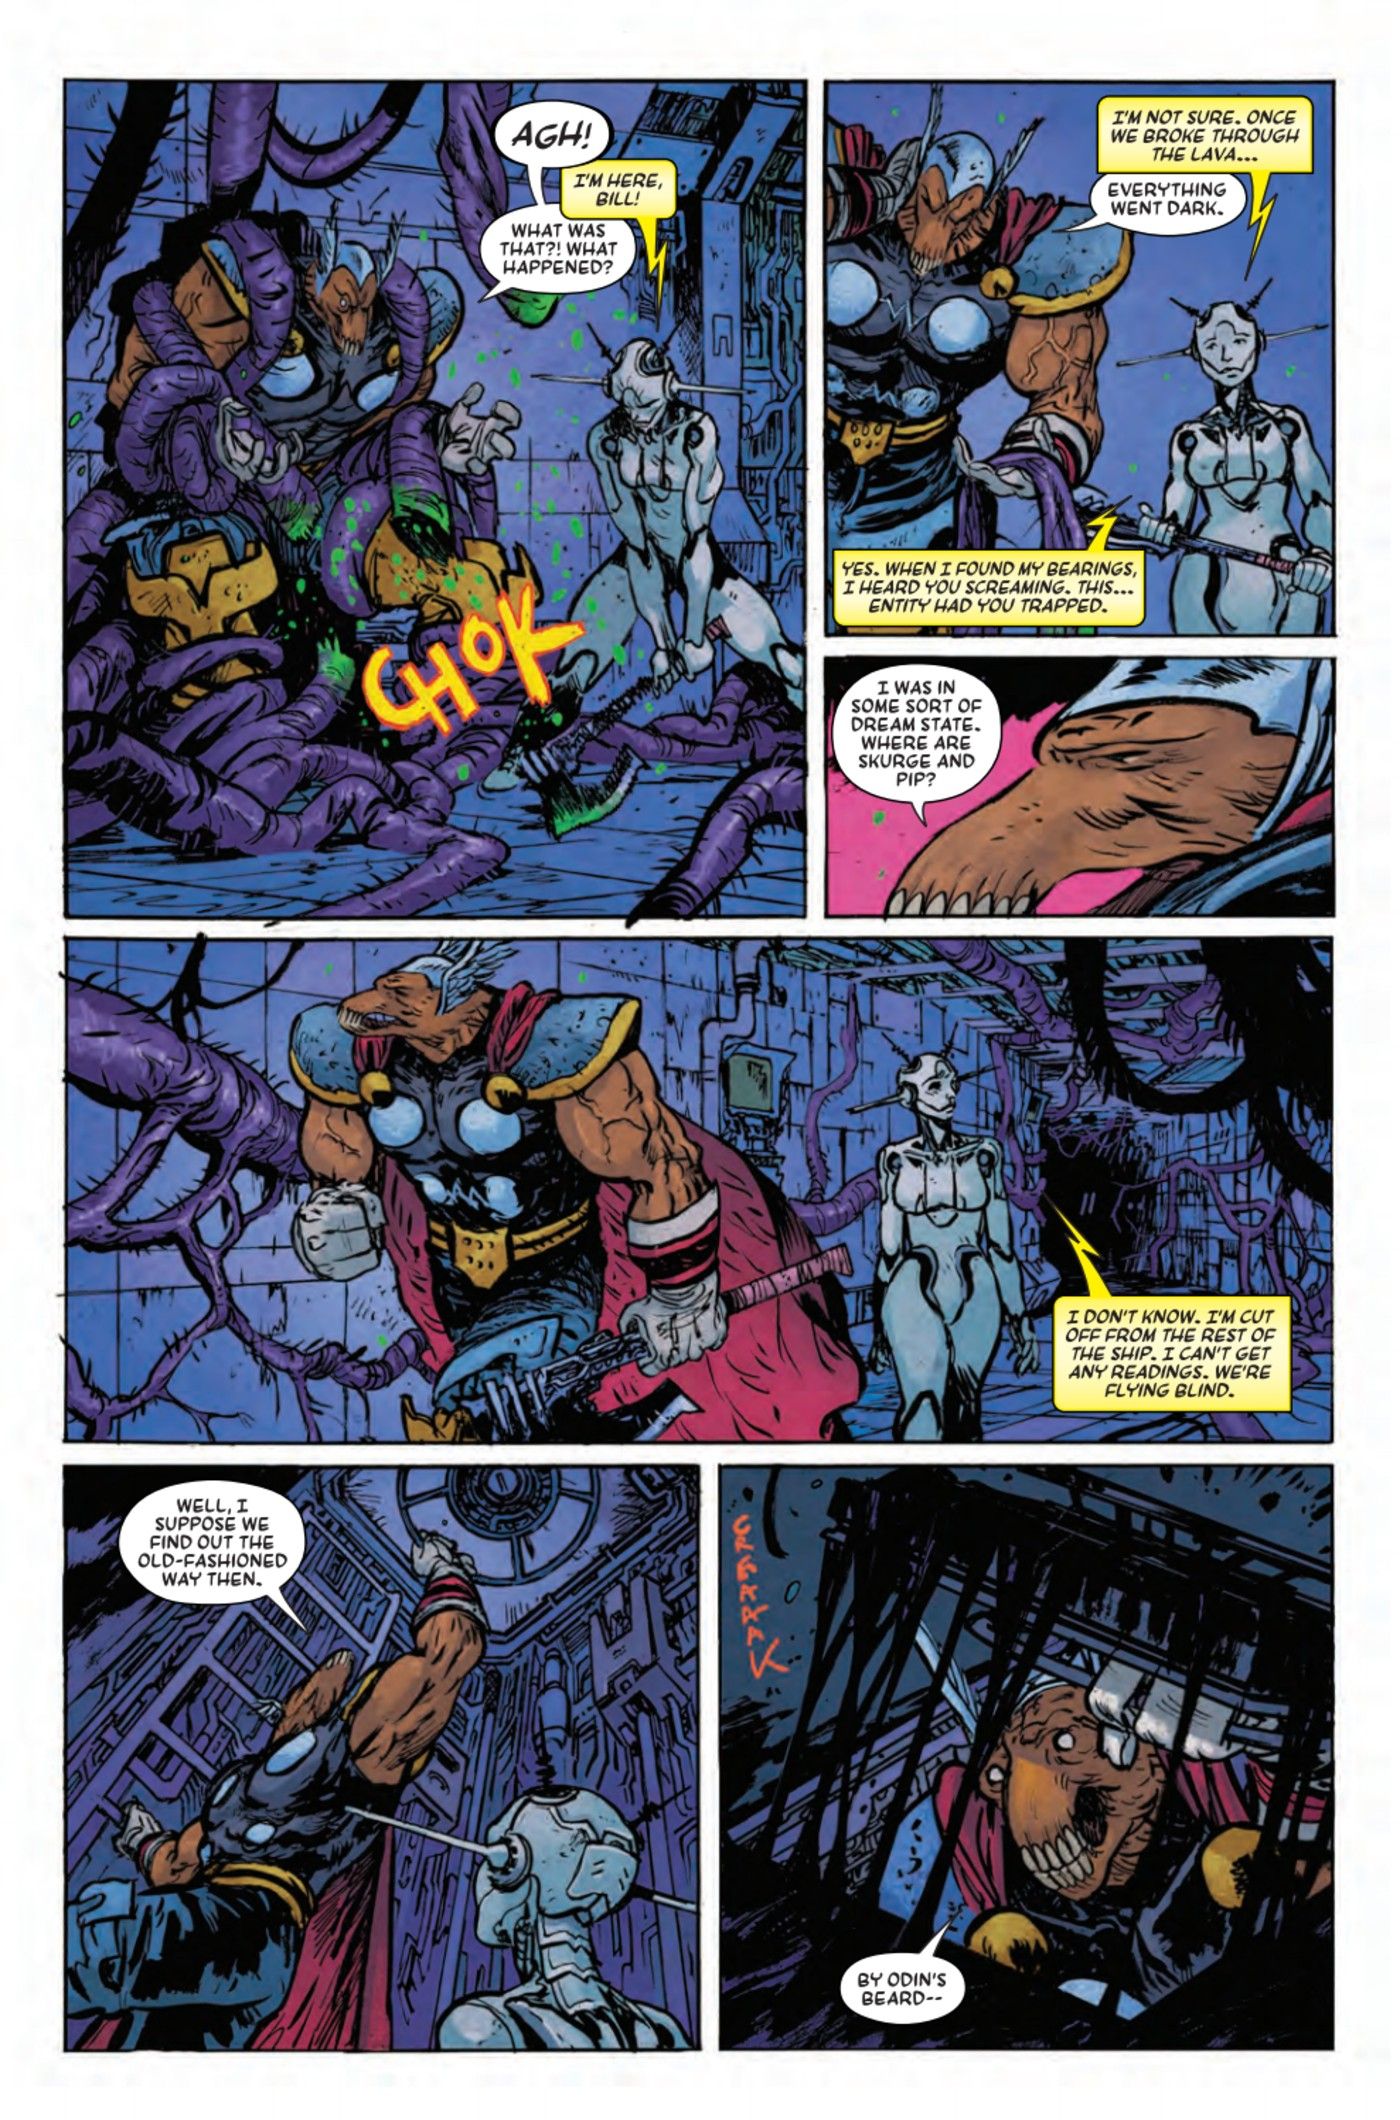 Beta Ray Bill 4 preview page 2 Thor Odin Monster